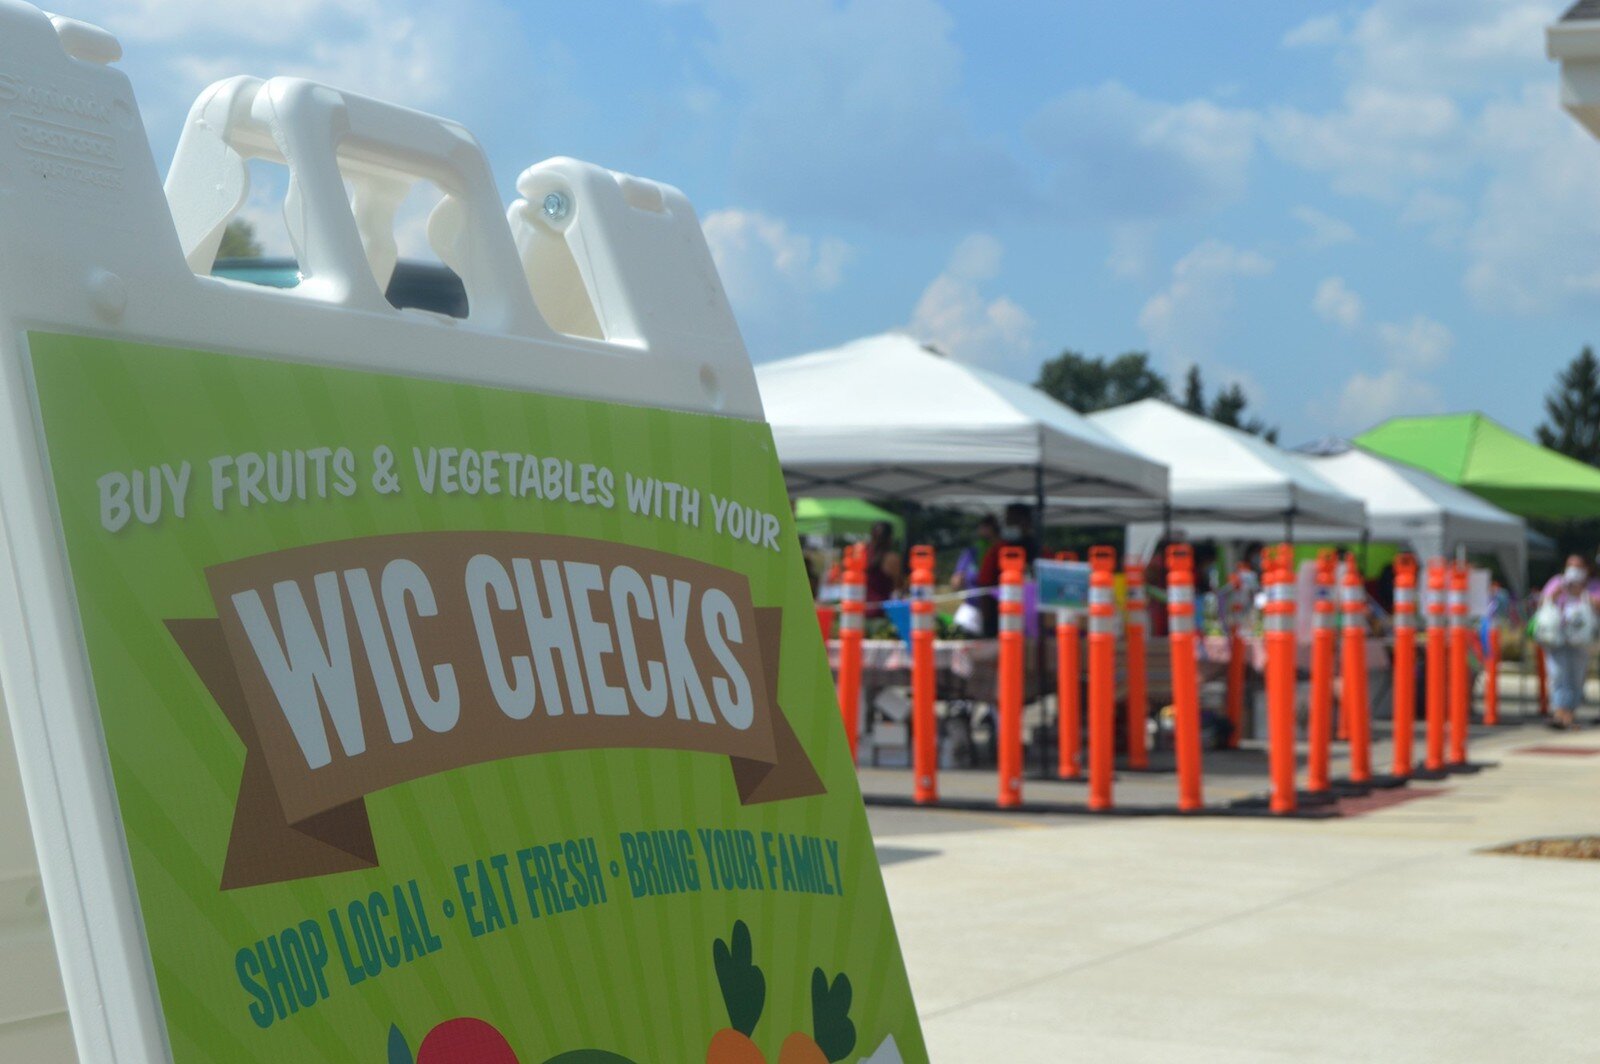 A WIC Check sign at the HEAL Farmer's Market.